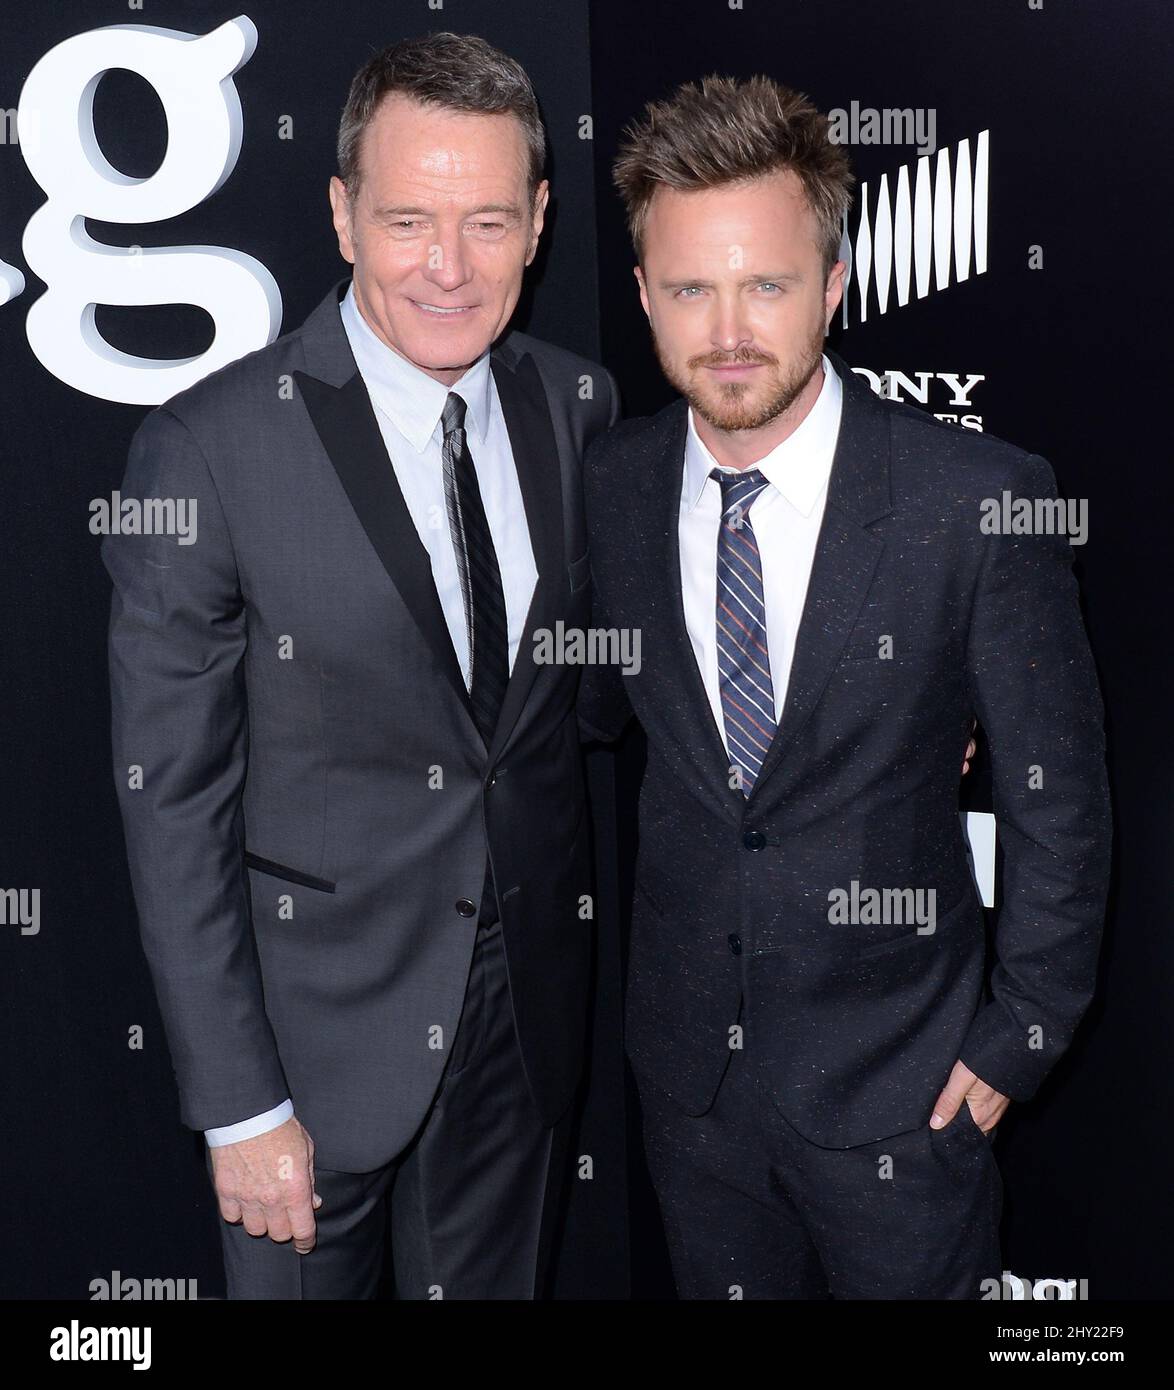 Bryan Cranston and Aaron Paul arriving for the premiere of Breaking Bad held at Sony Pictures Studios in Culver City, Los Angeles. Stock Photo